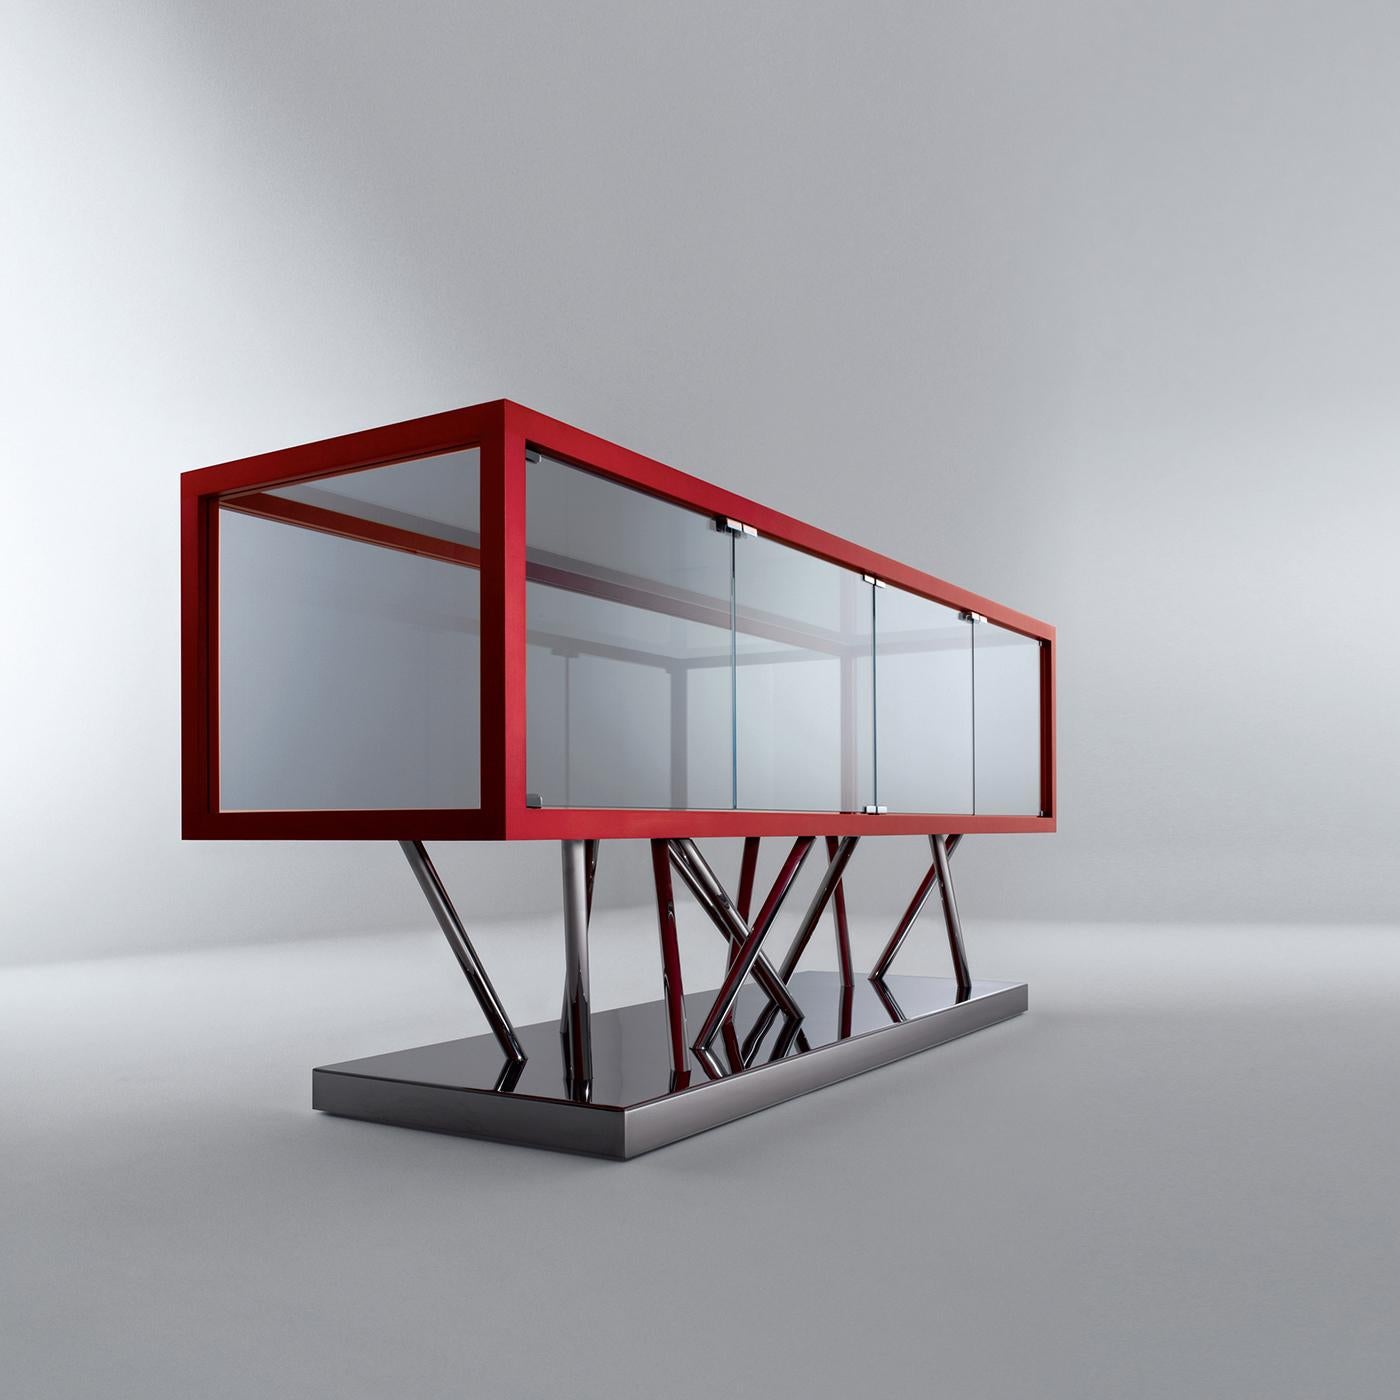 This sideboard sits atop a polished steel base and is trimmed in red aniline stained maple. It features four hinged doors, while its sides, rear panel and top are in ultra clear glass. Satin glass is available on request. SA 02 is a sculptural piece